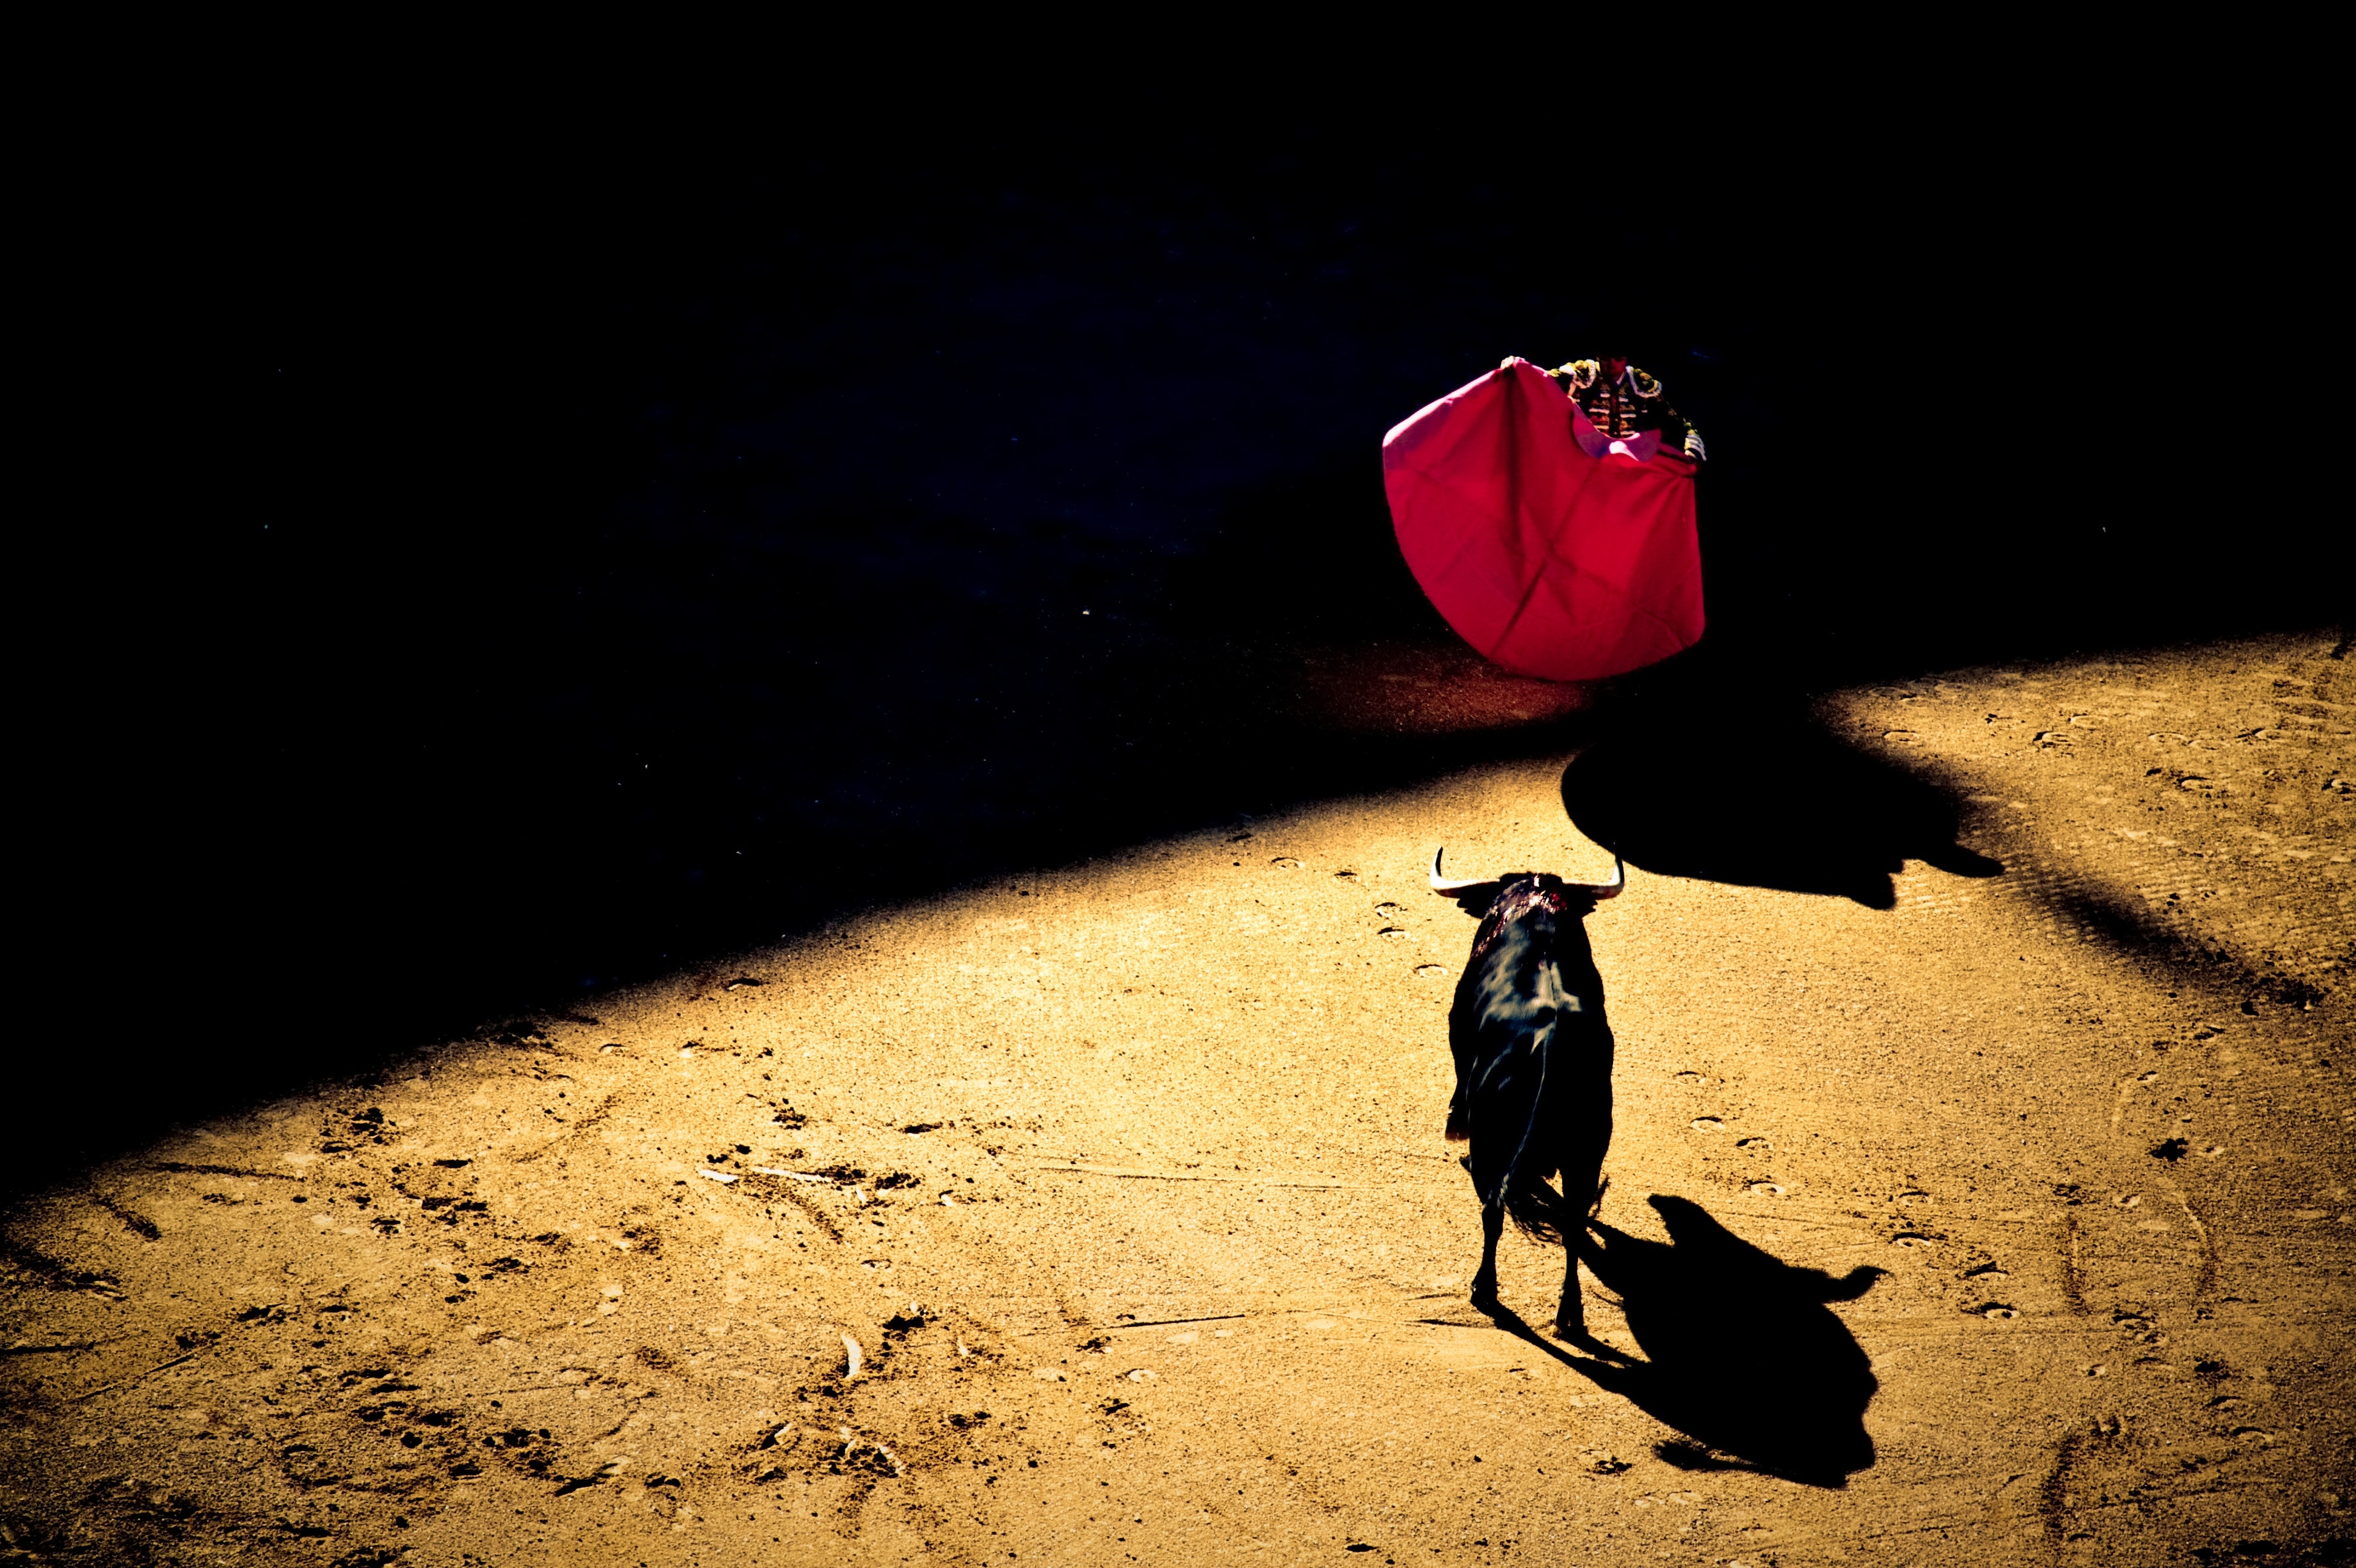 A matador holding a red flag up in front of a bull.│Source: Unsplash